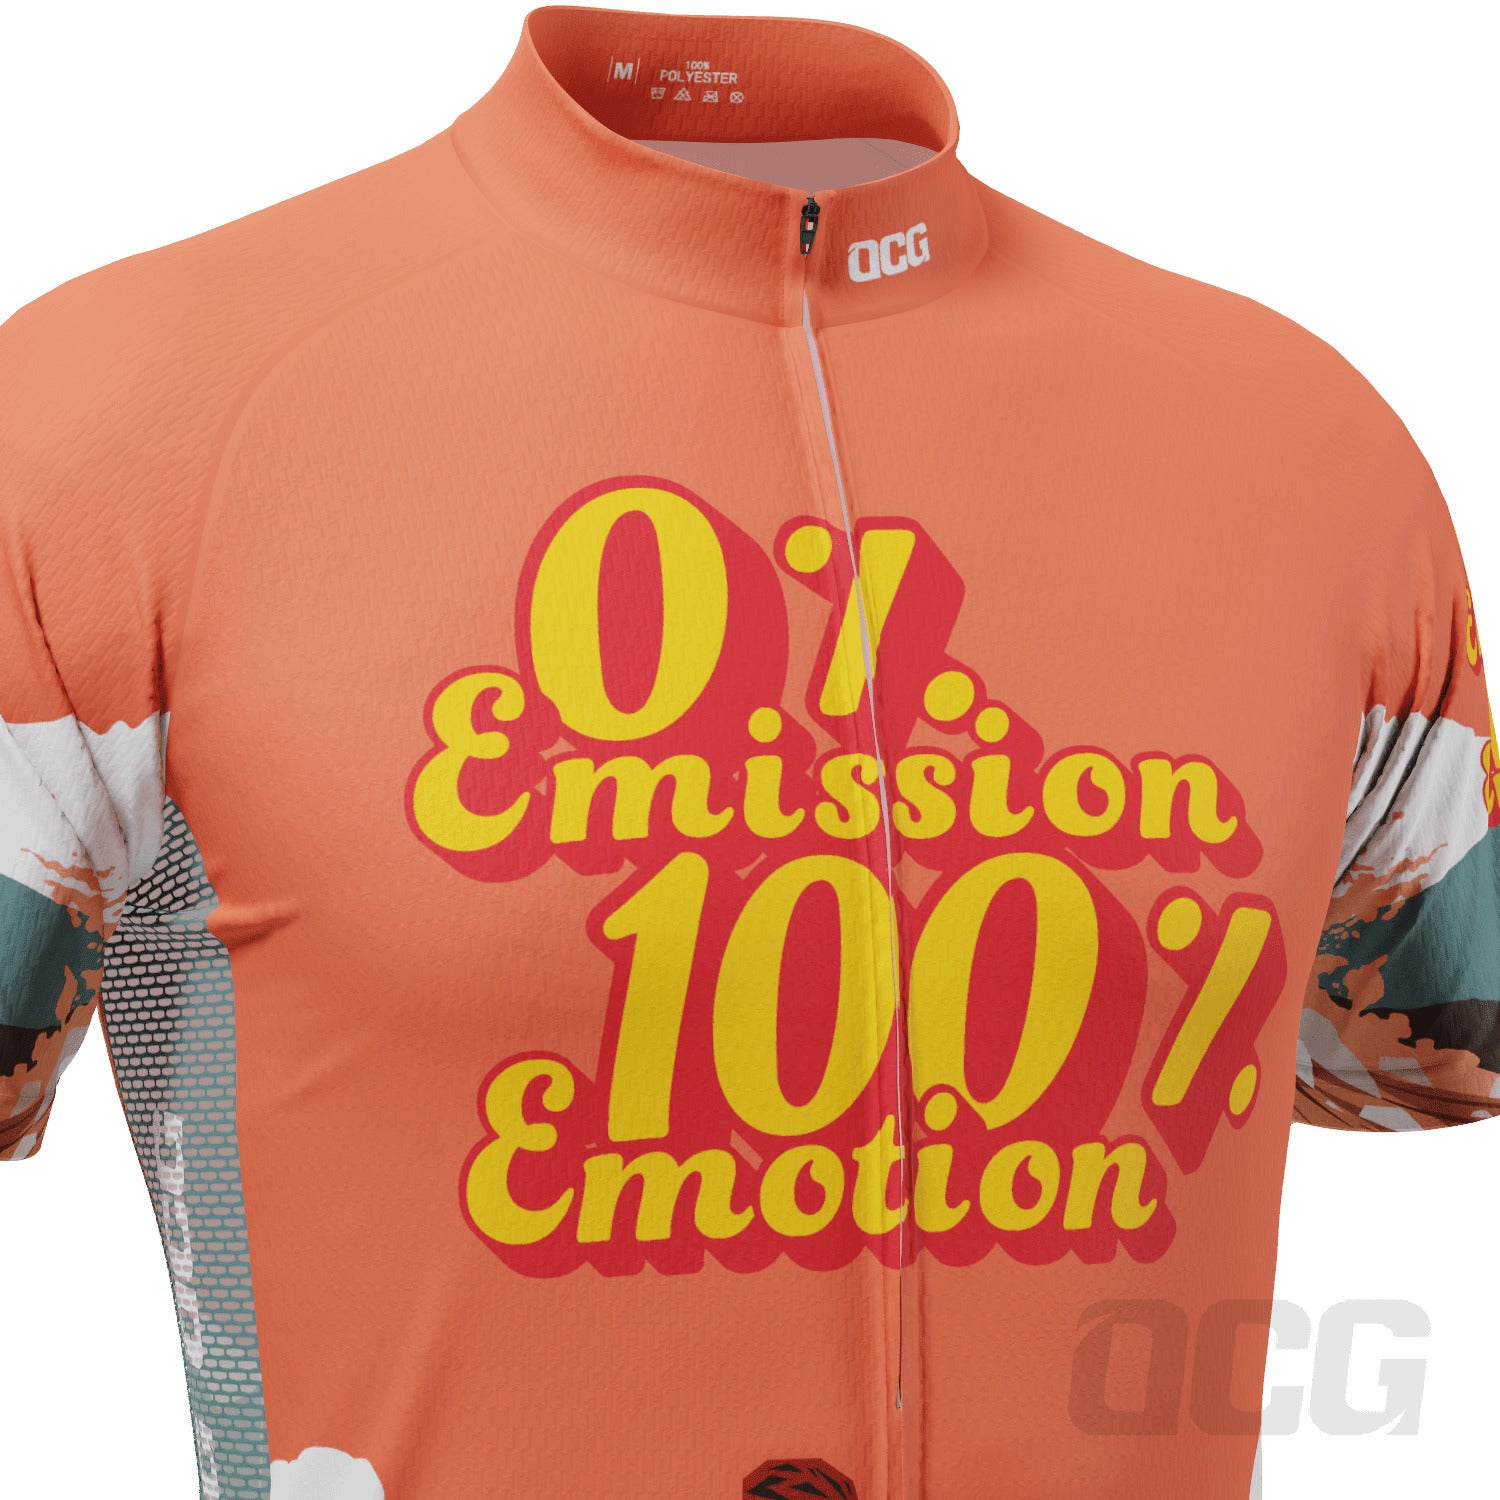 Men's No Emissions Full Emotion Short Sleeve Cycling Jersey